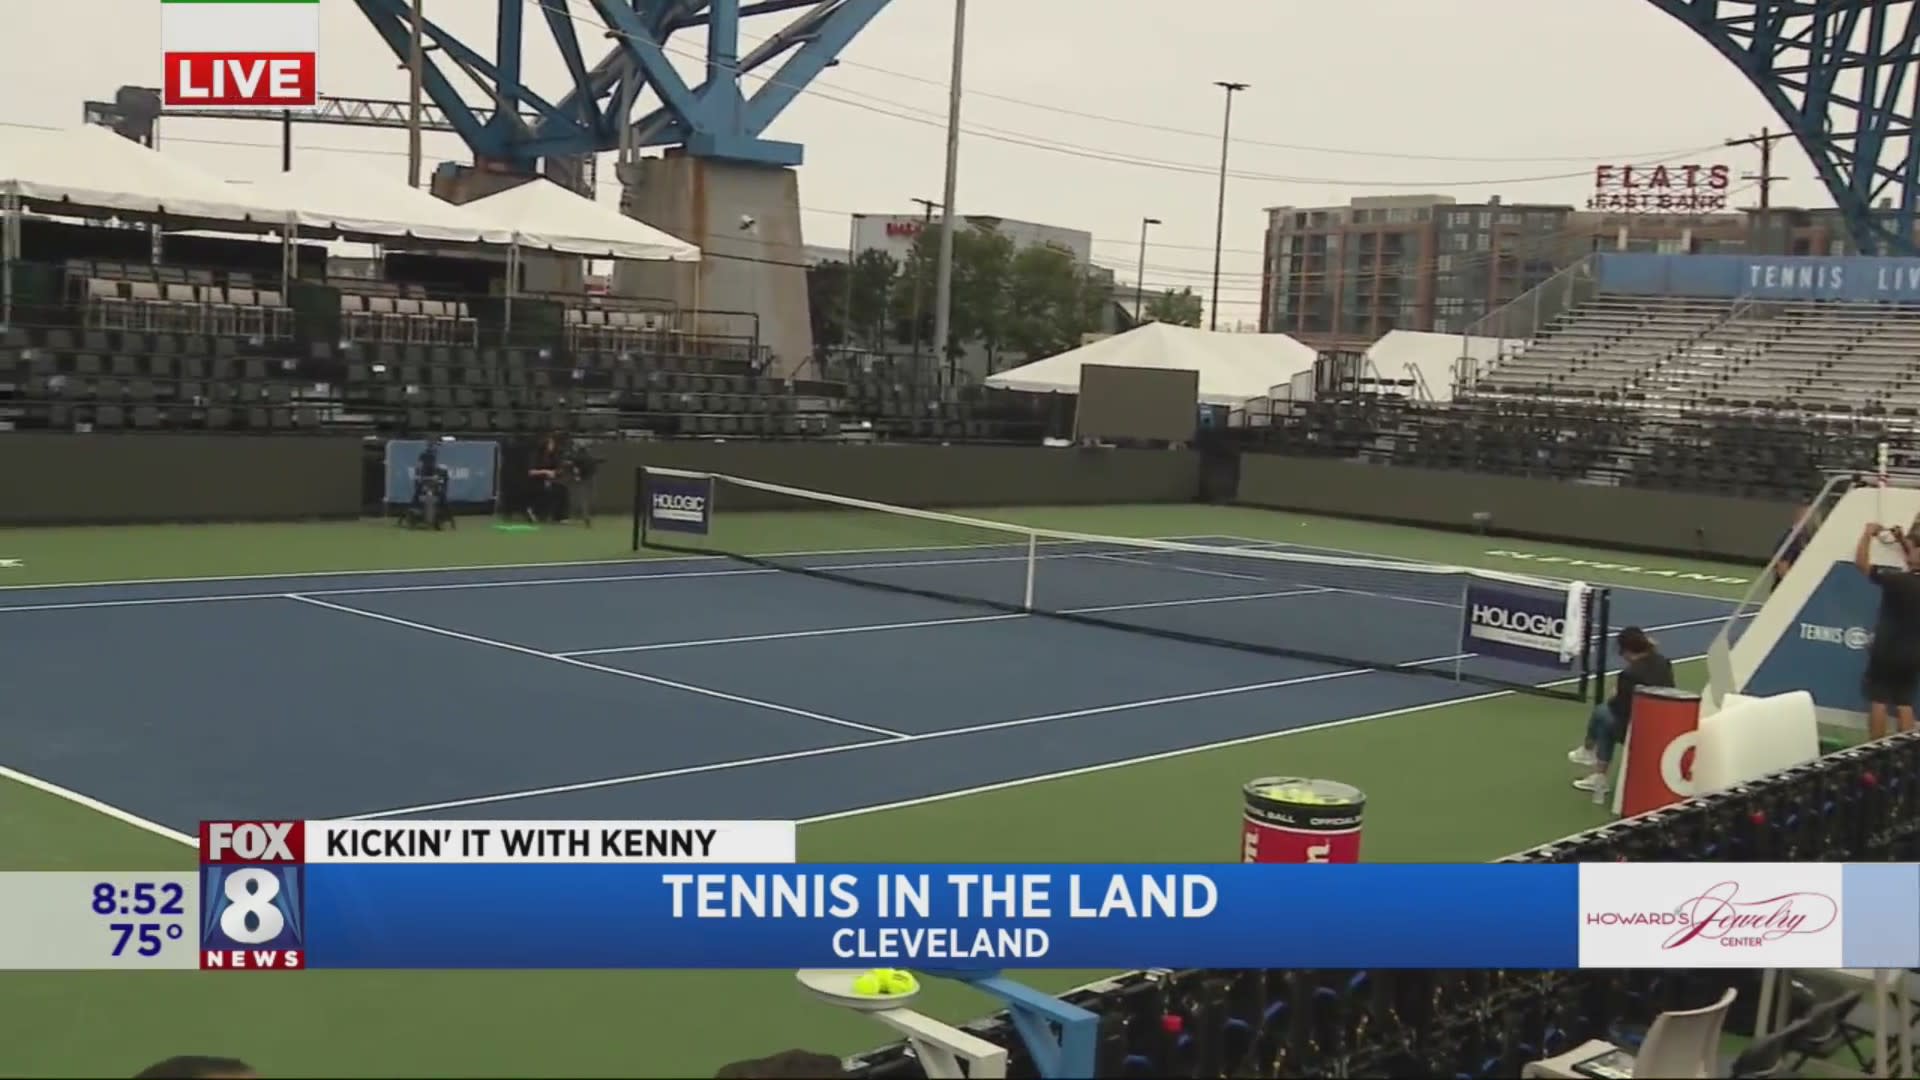 World class tennis hits the courts in Cleveland at Tennis in the Land